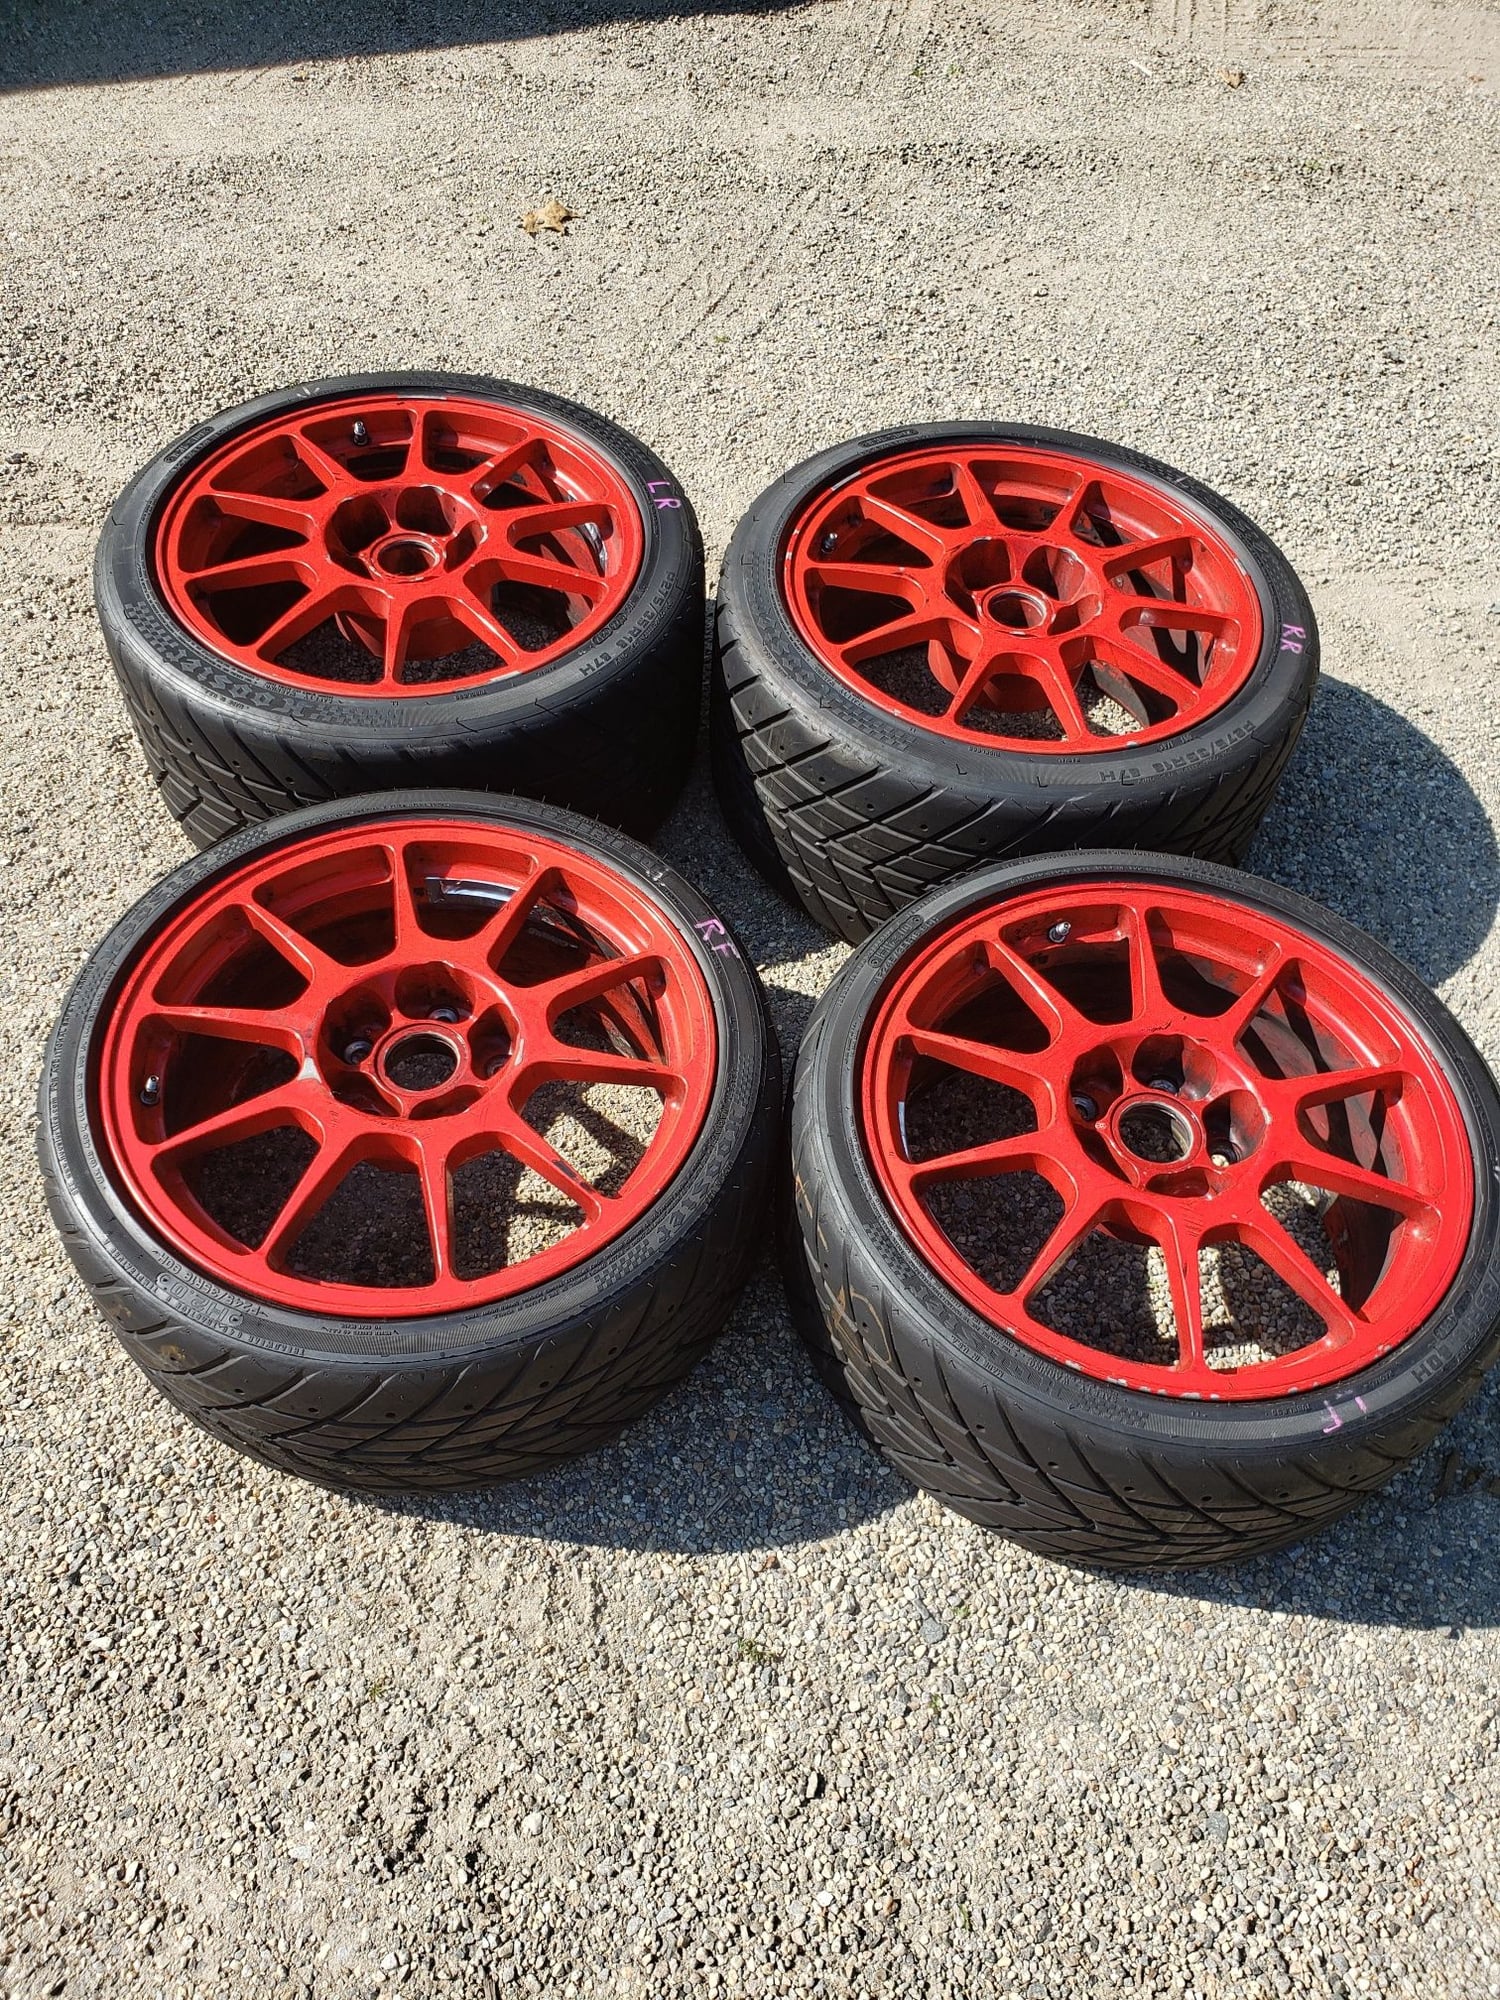 Wheels and Tires/Axles - CCW Wheels plus Hoosier rains - Cayman - Used - 2004 to 2015 Porsche Cayman - Easton, CT 06612, United States